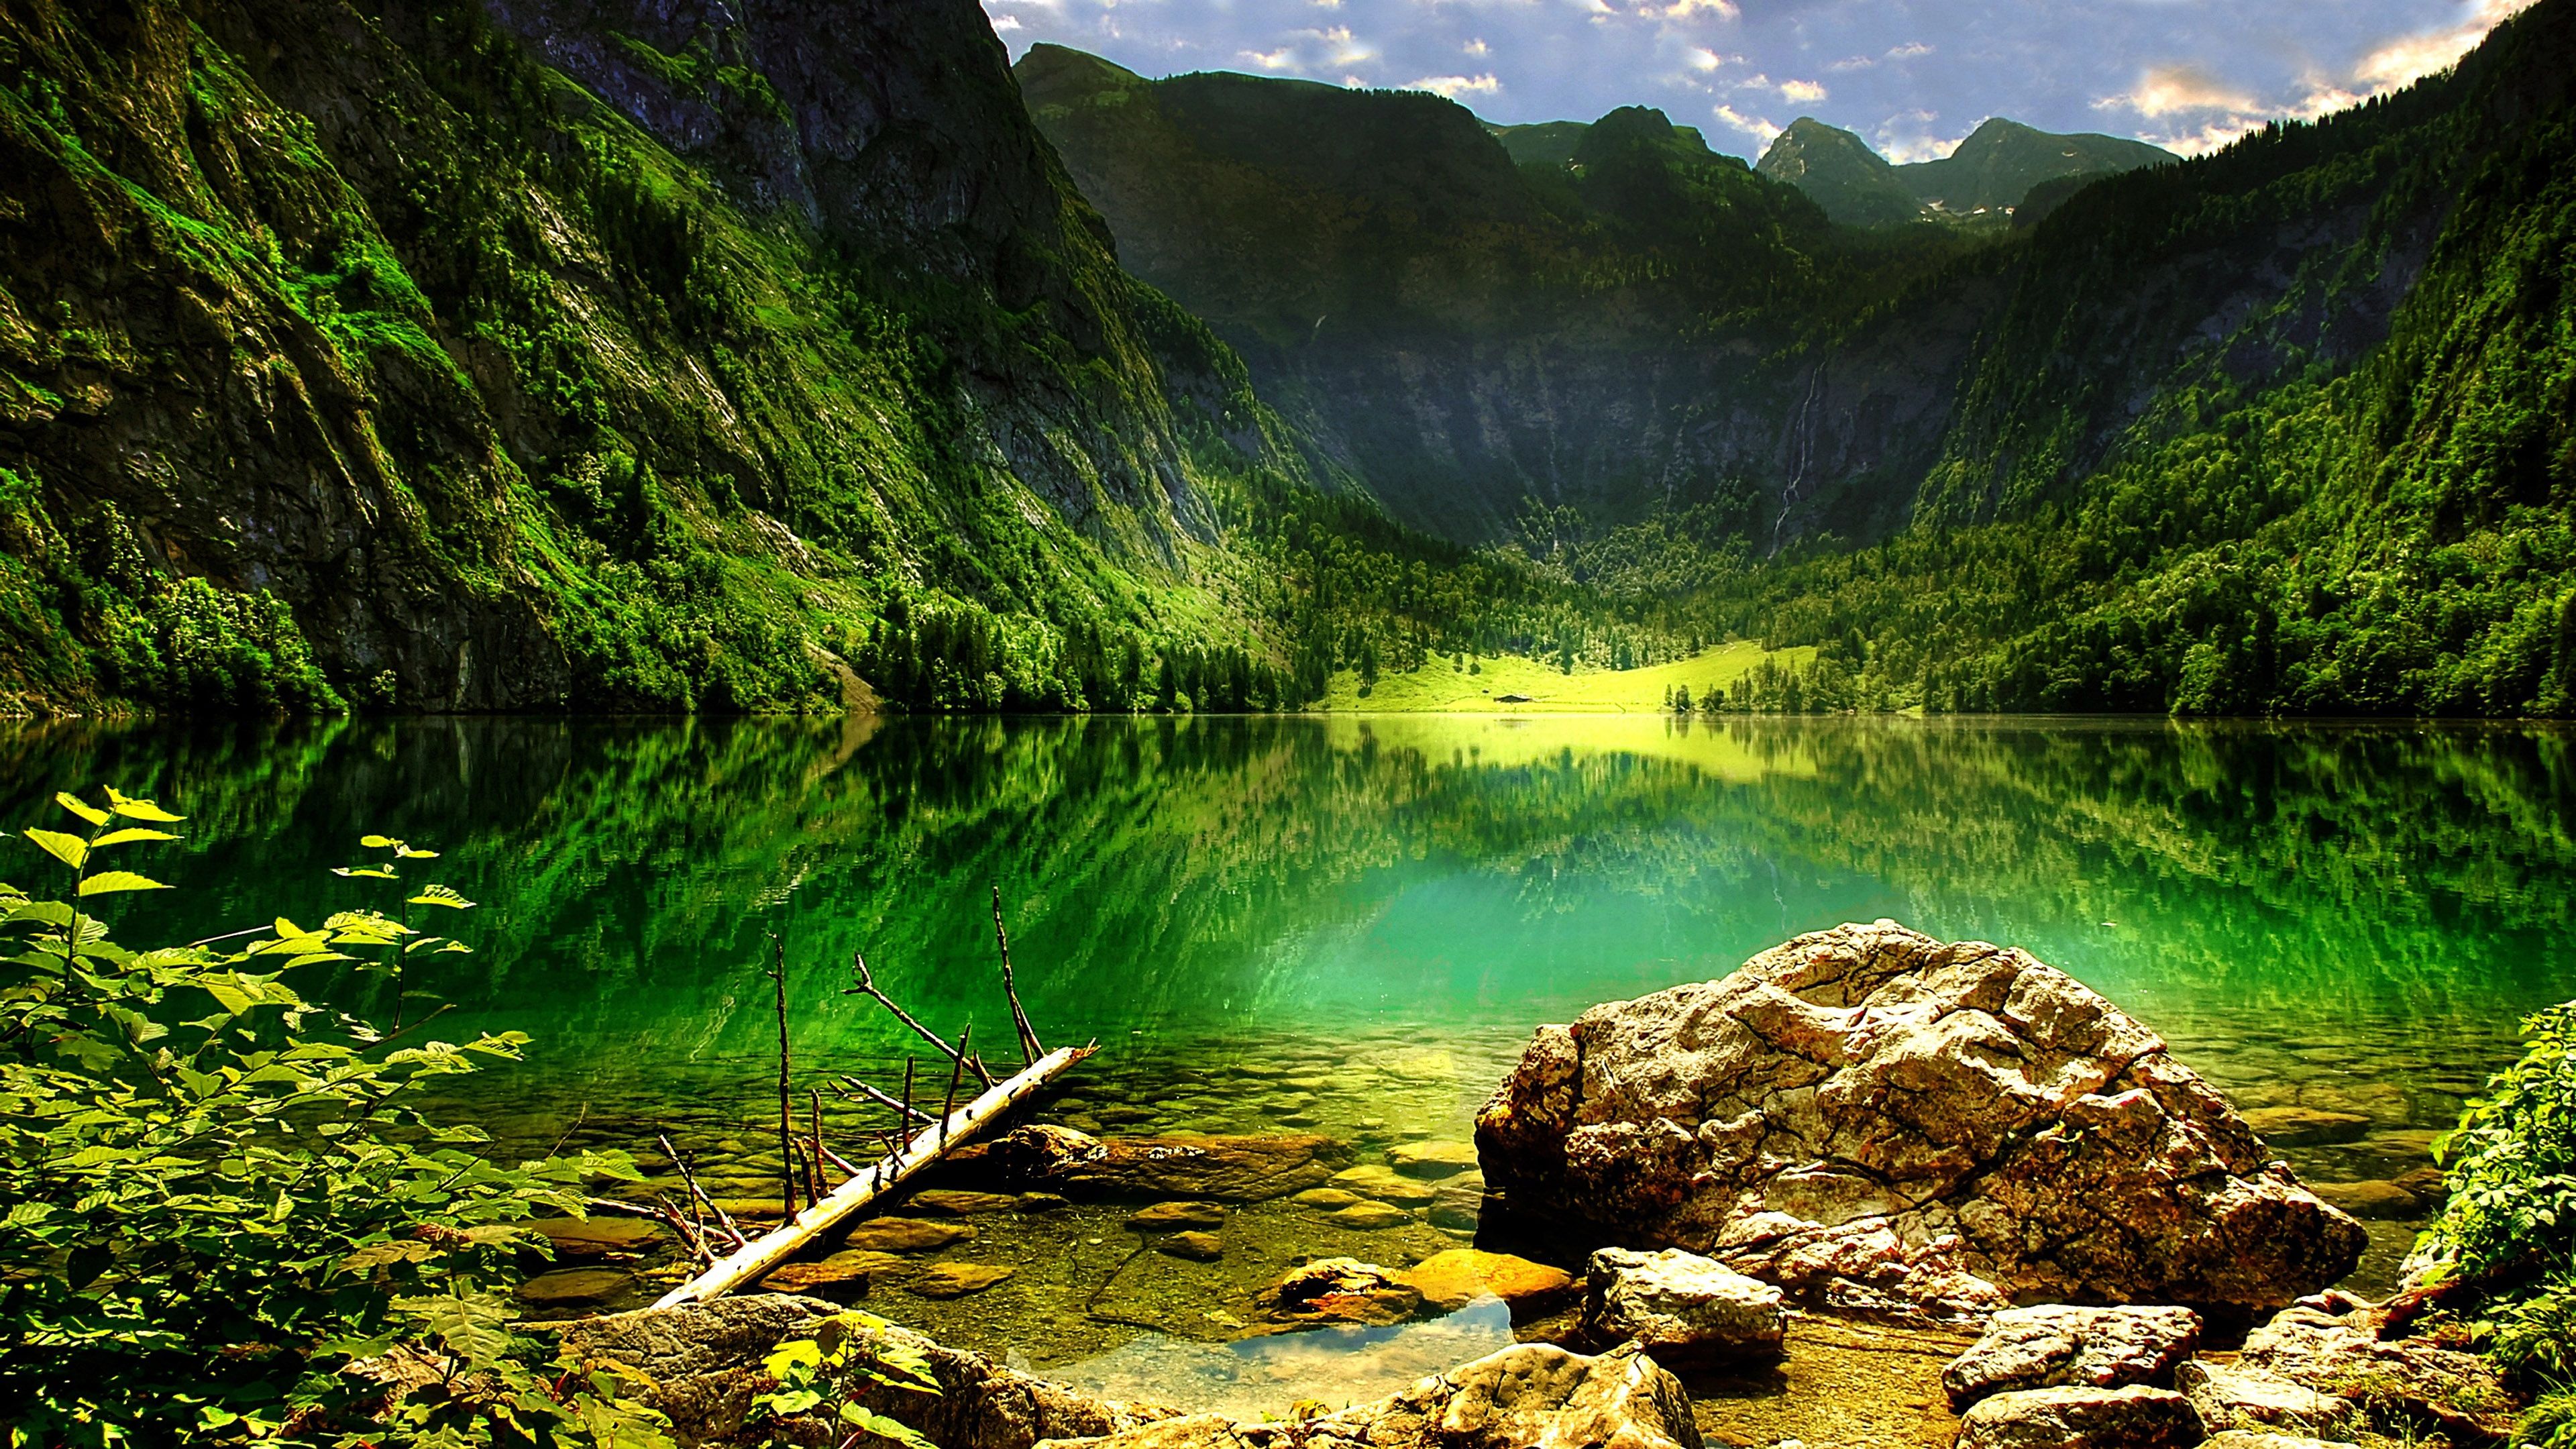 Königssee Mountain Lake In The Bavarian Alps Lake In Germany Ultra